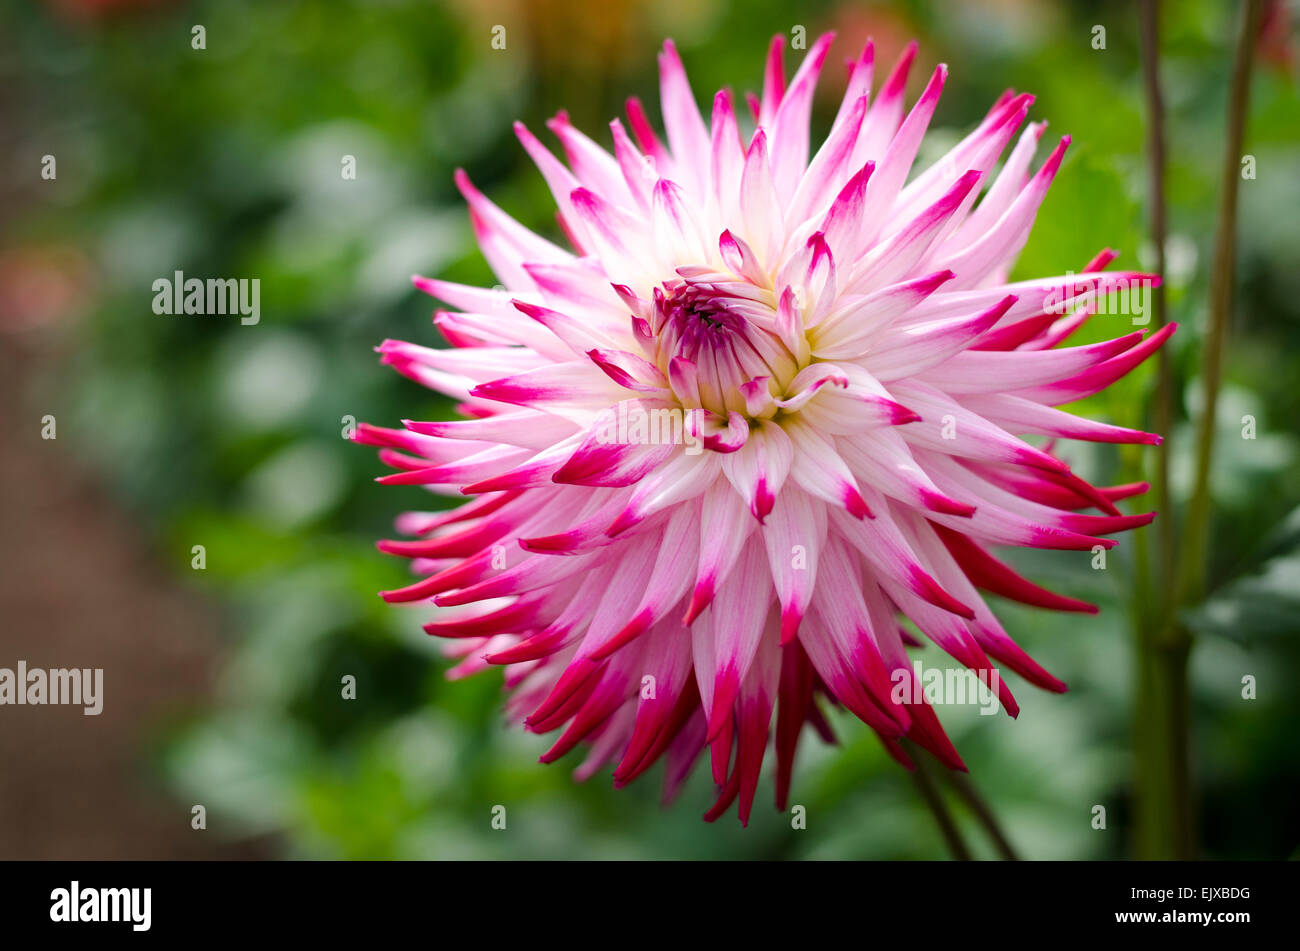 A single white dahlia with pink tipped spiky petals growing outdoors. Stock Photo